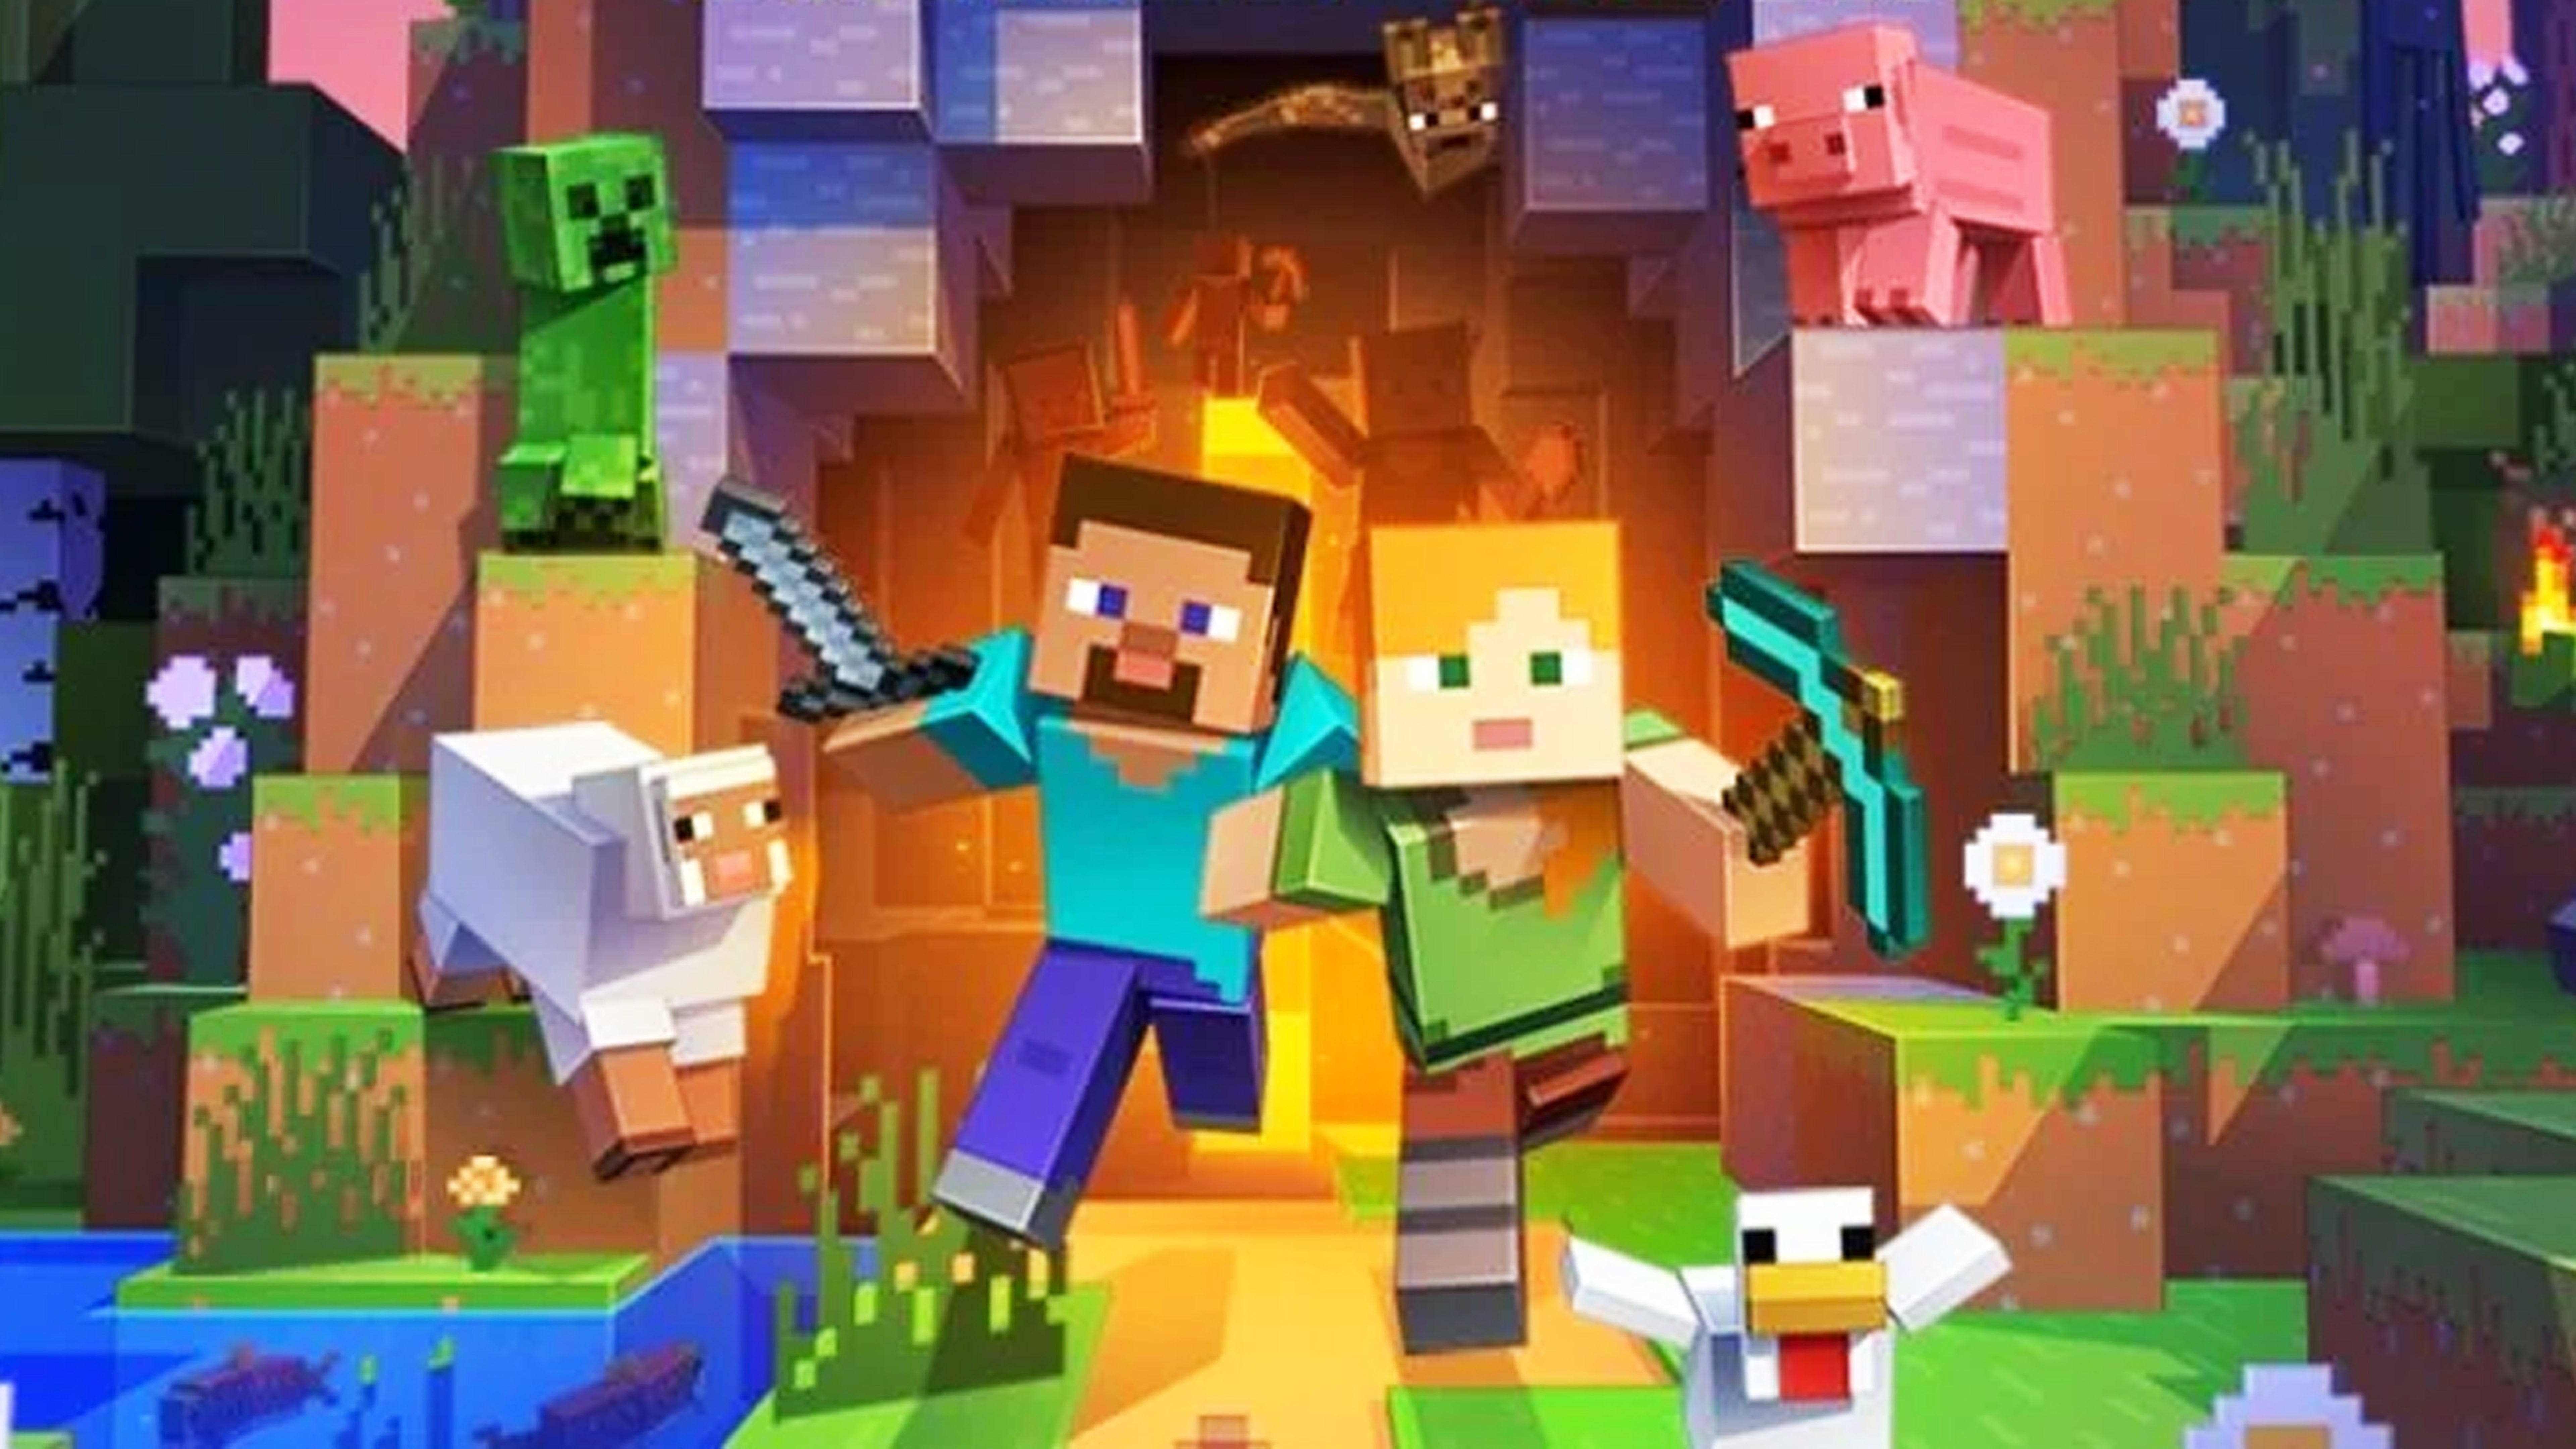 Microsoft-Owned Mojang Bans NFTs And Blockchain Integrations On Minecraft